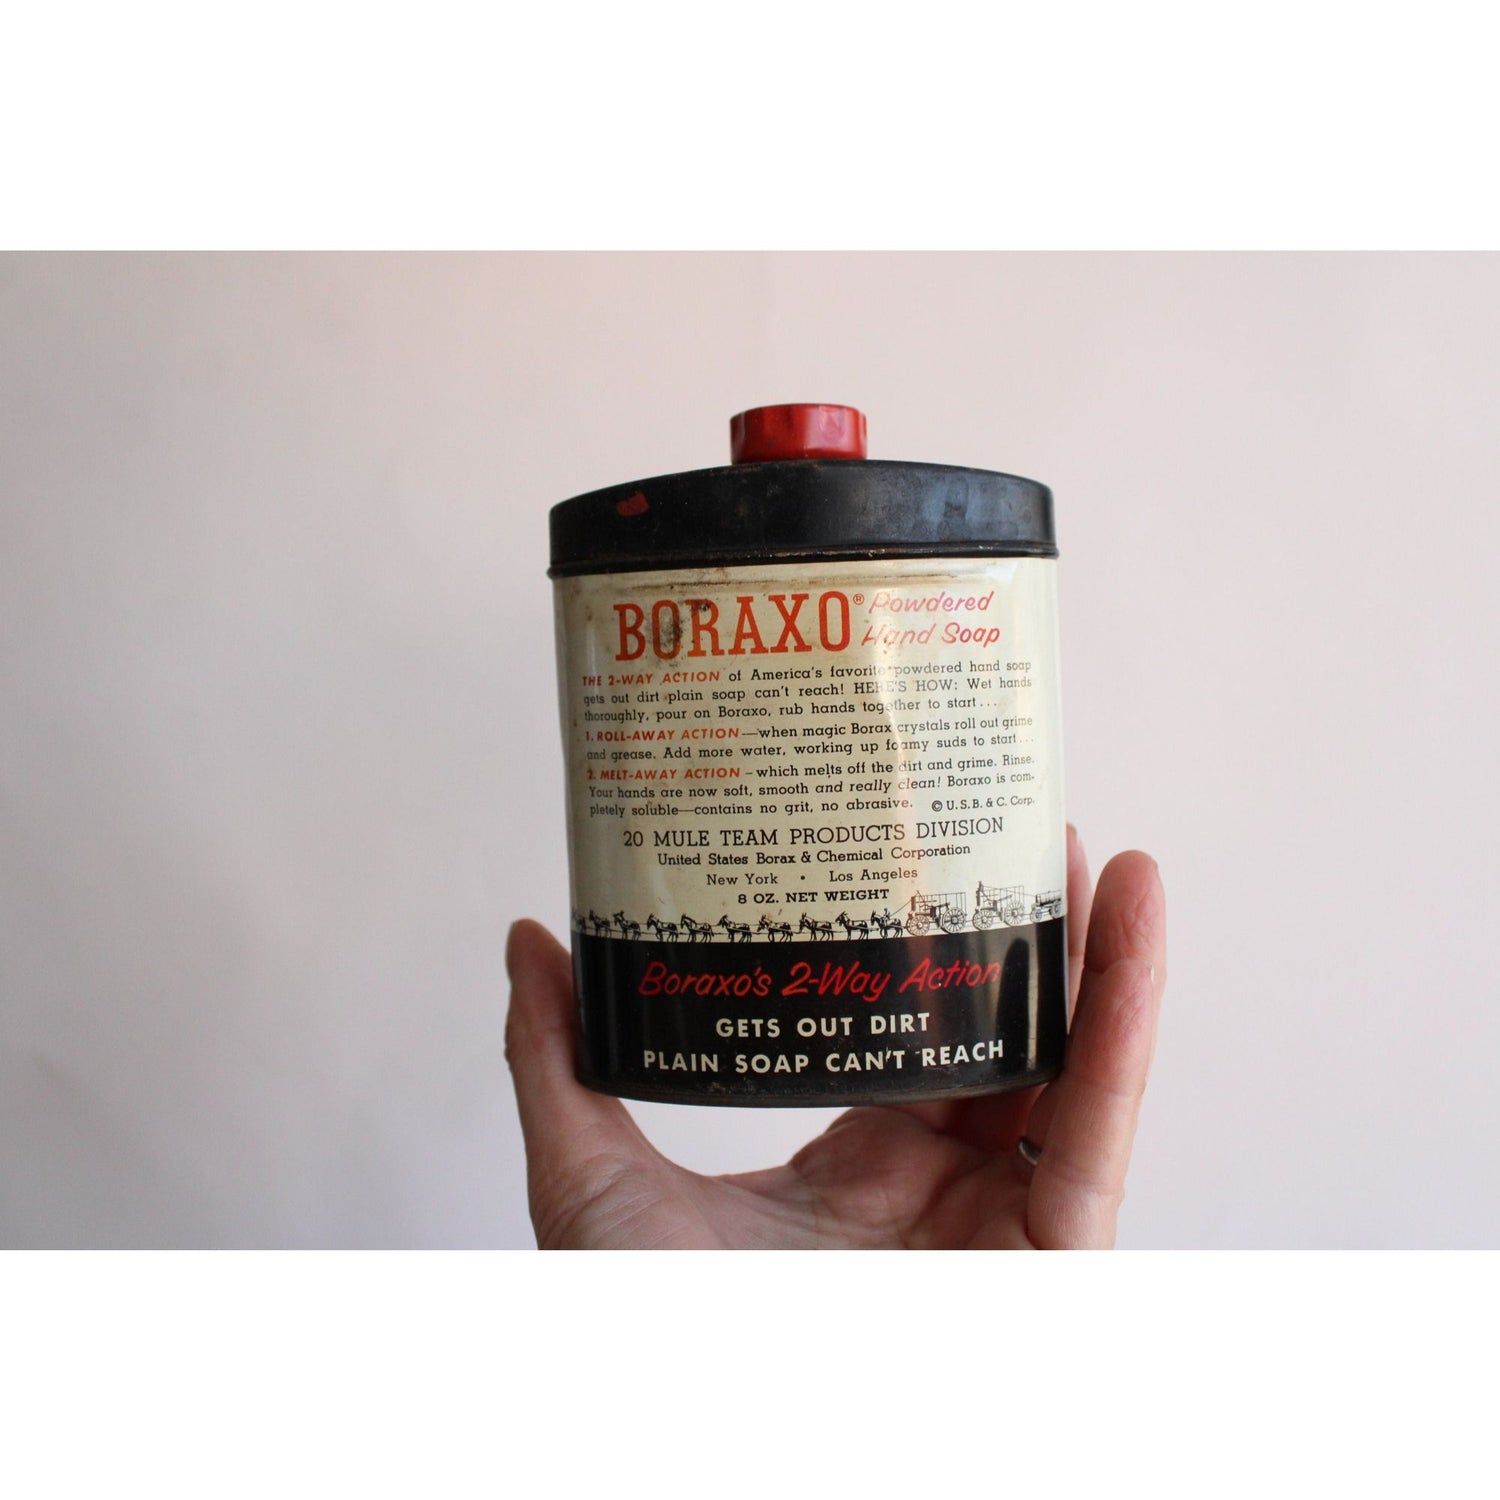 Vintage 30s/40s Tin Of Boraxo Hand Soap Powder By 20 Mules